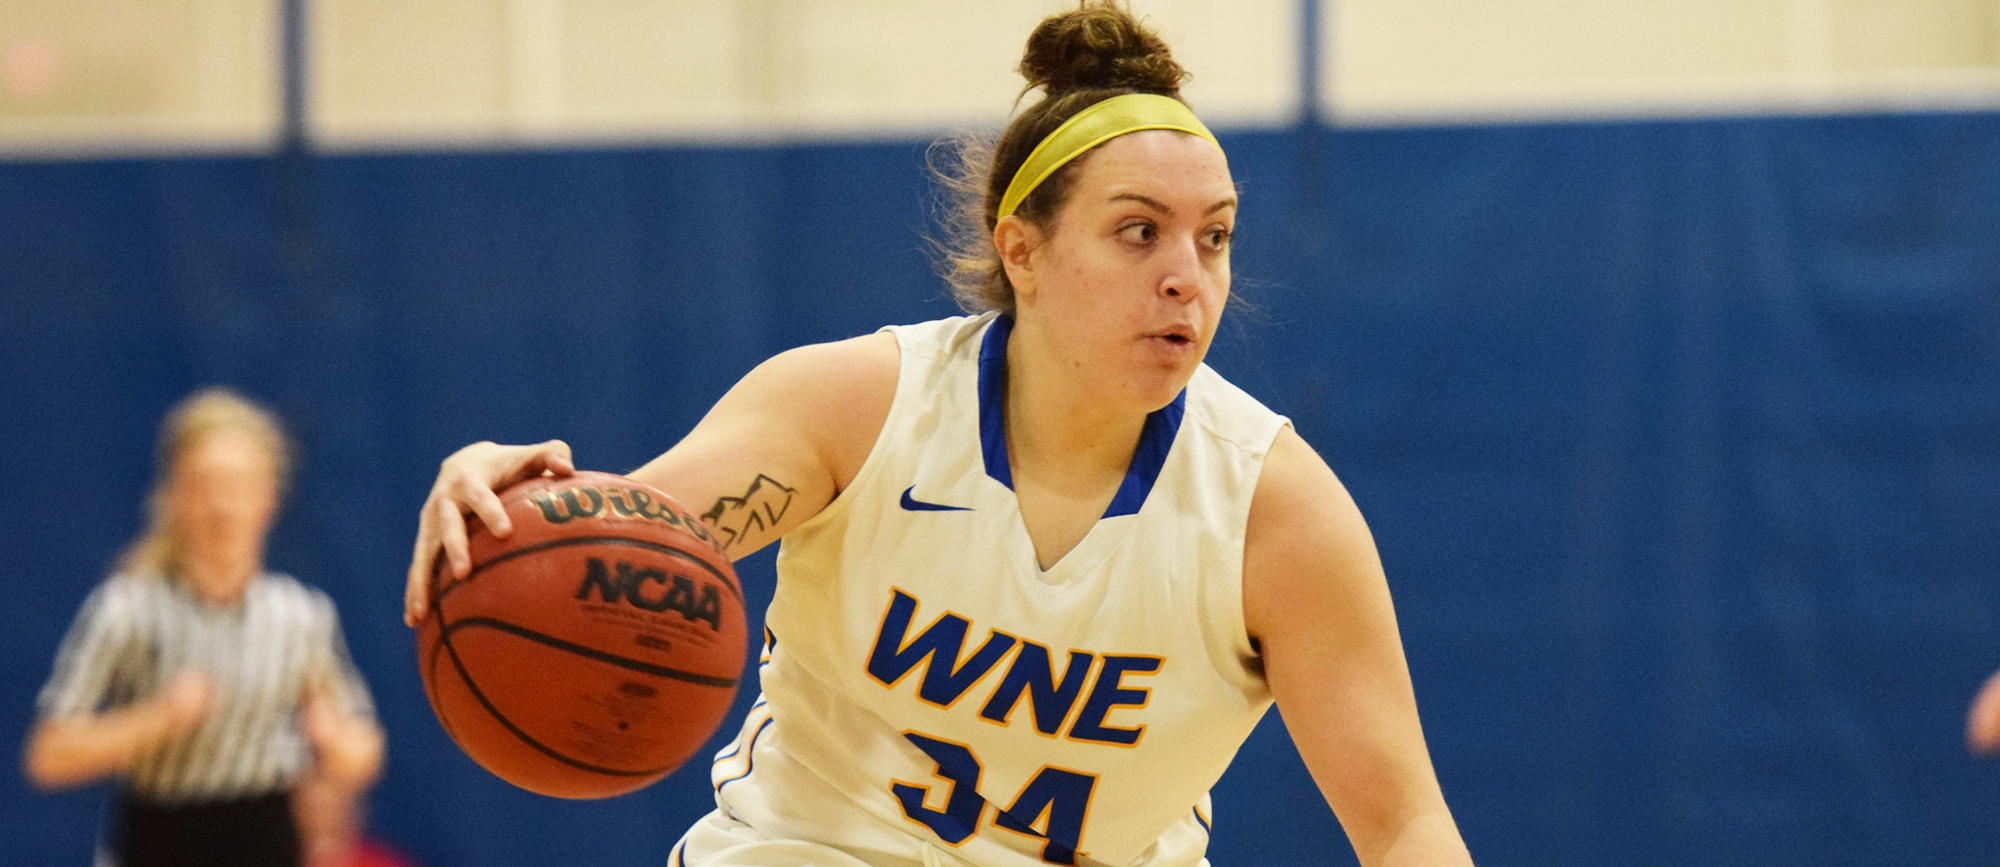 Sophomore Julia Quinn scored 9 of her 12 points in the fourth quarter of Western New England's 65-60 win at UNE on Saturday. (Photo by Rachael Margossian)